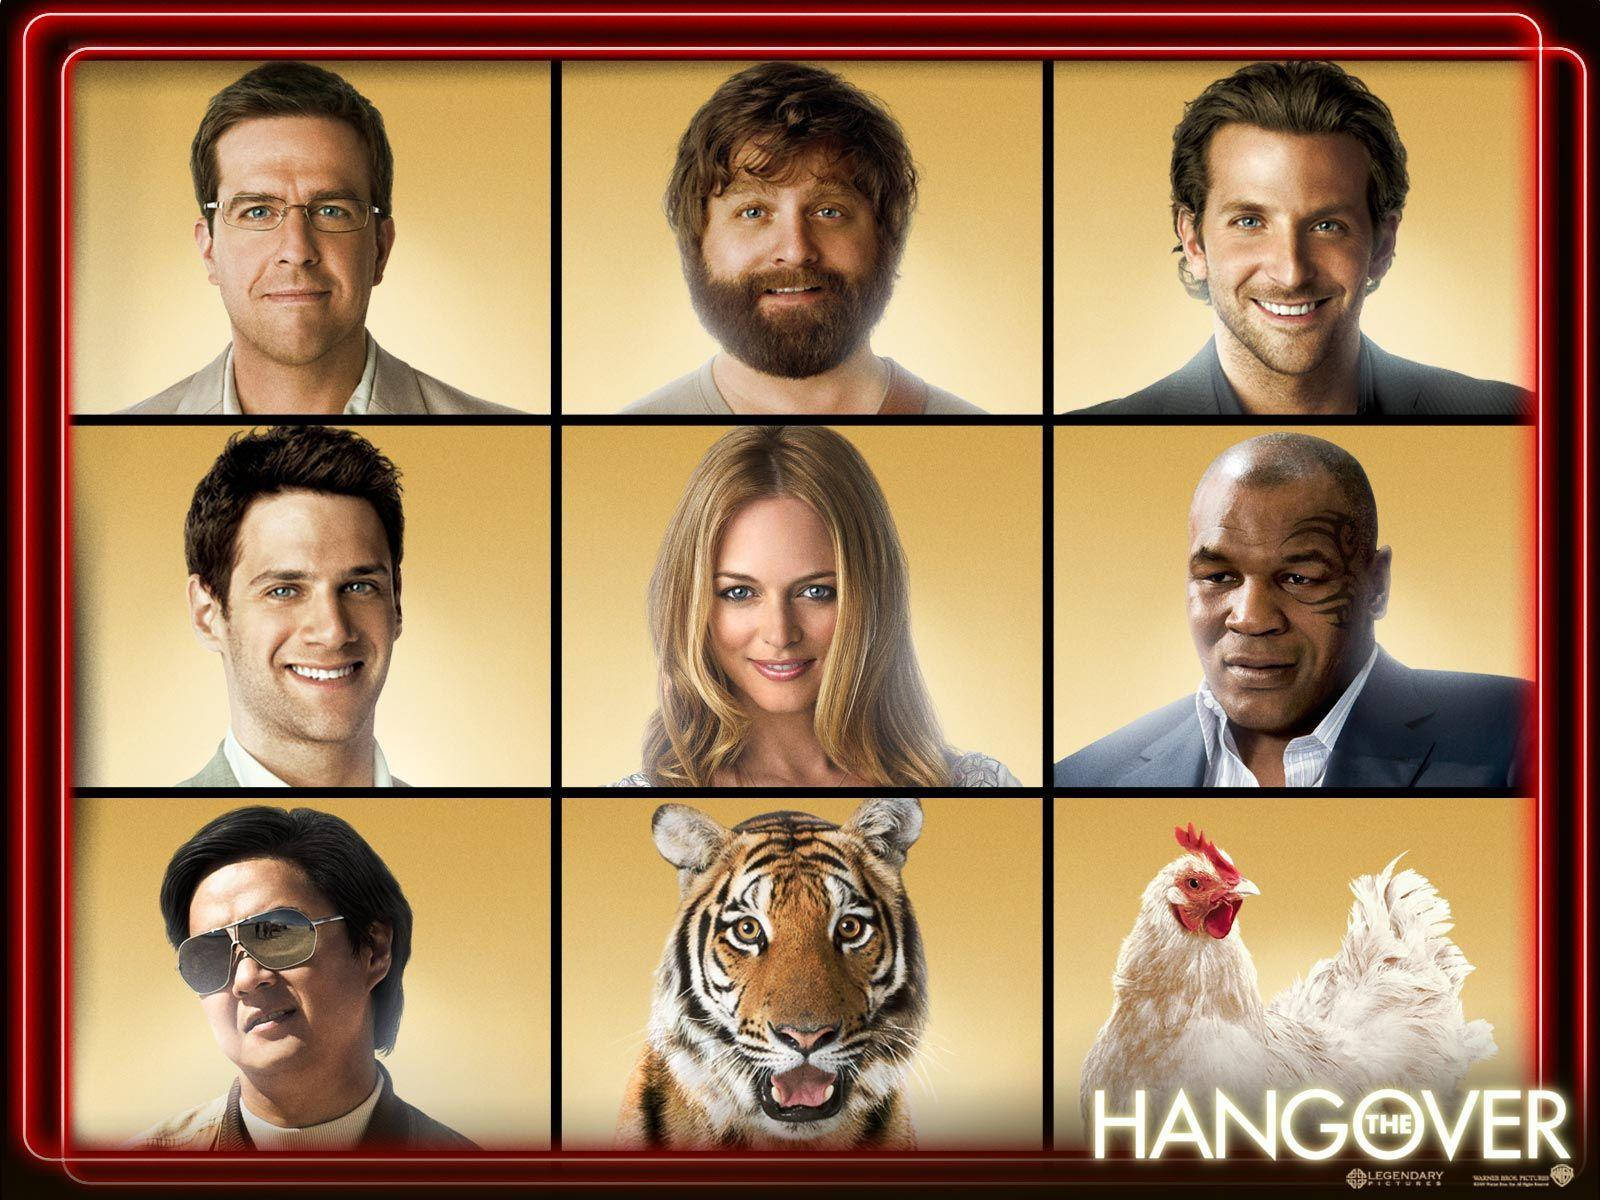 The Hangover American Comedy Movie Cast Poster Wallpaper